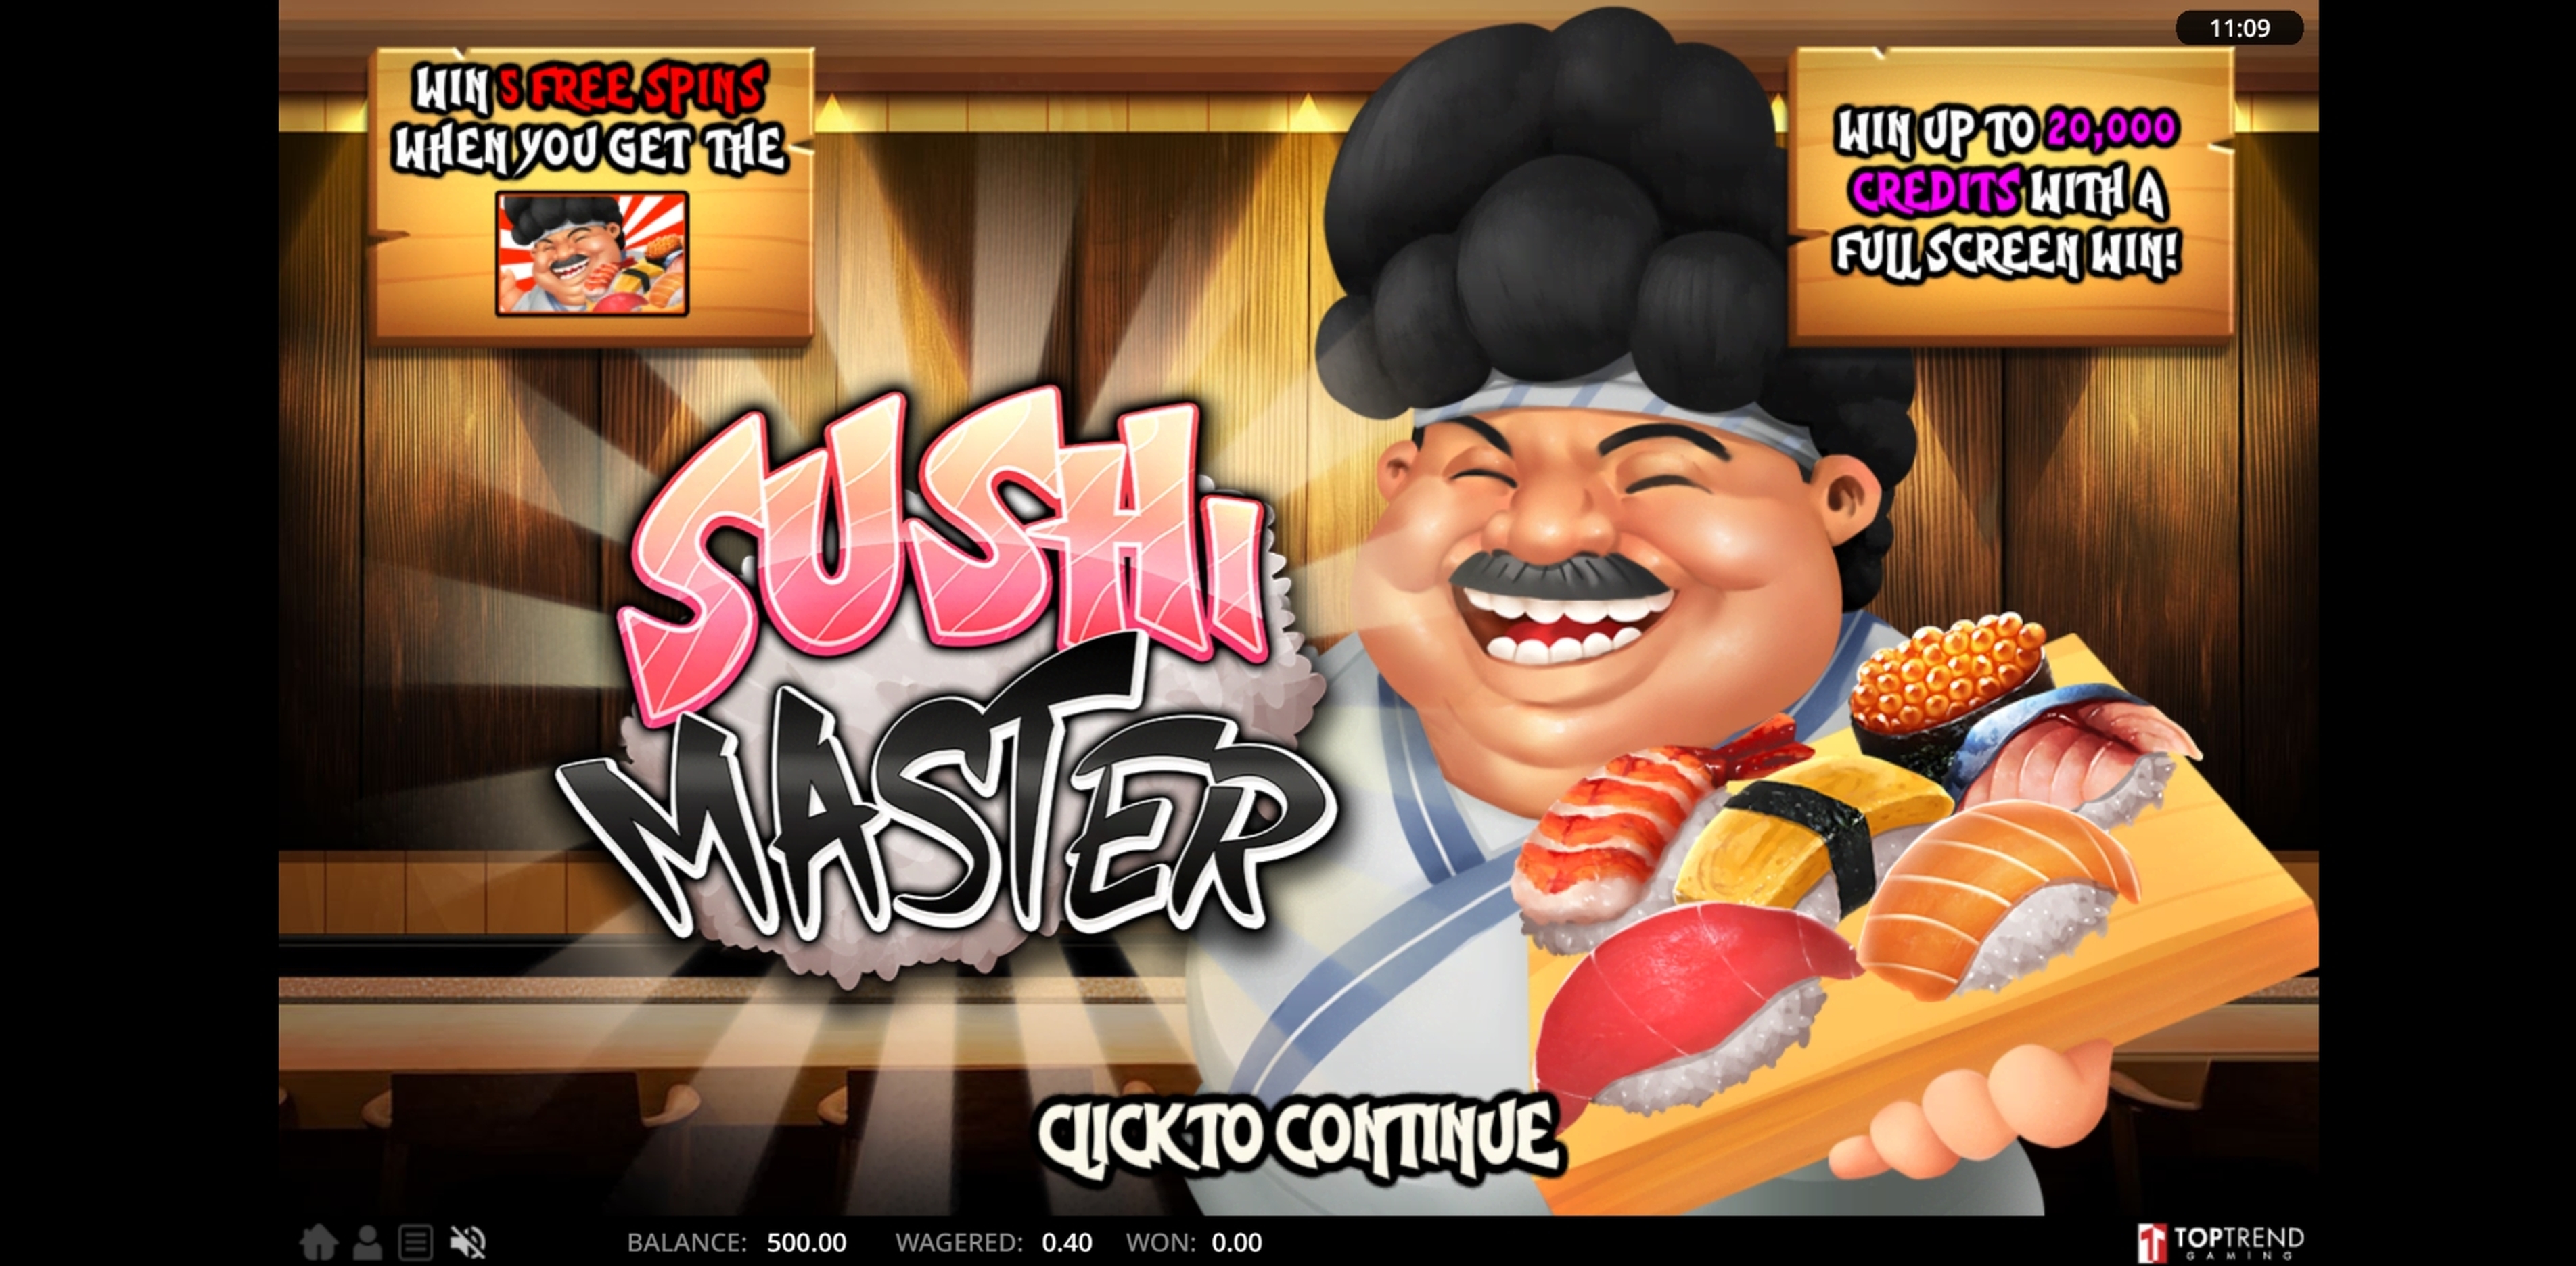 How to win R10 000+ on Hey Sushi Hollywoodbets spina zonke games